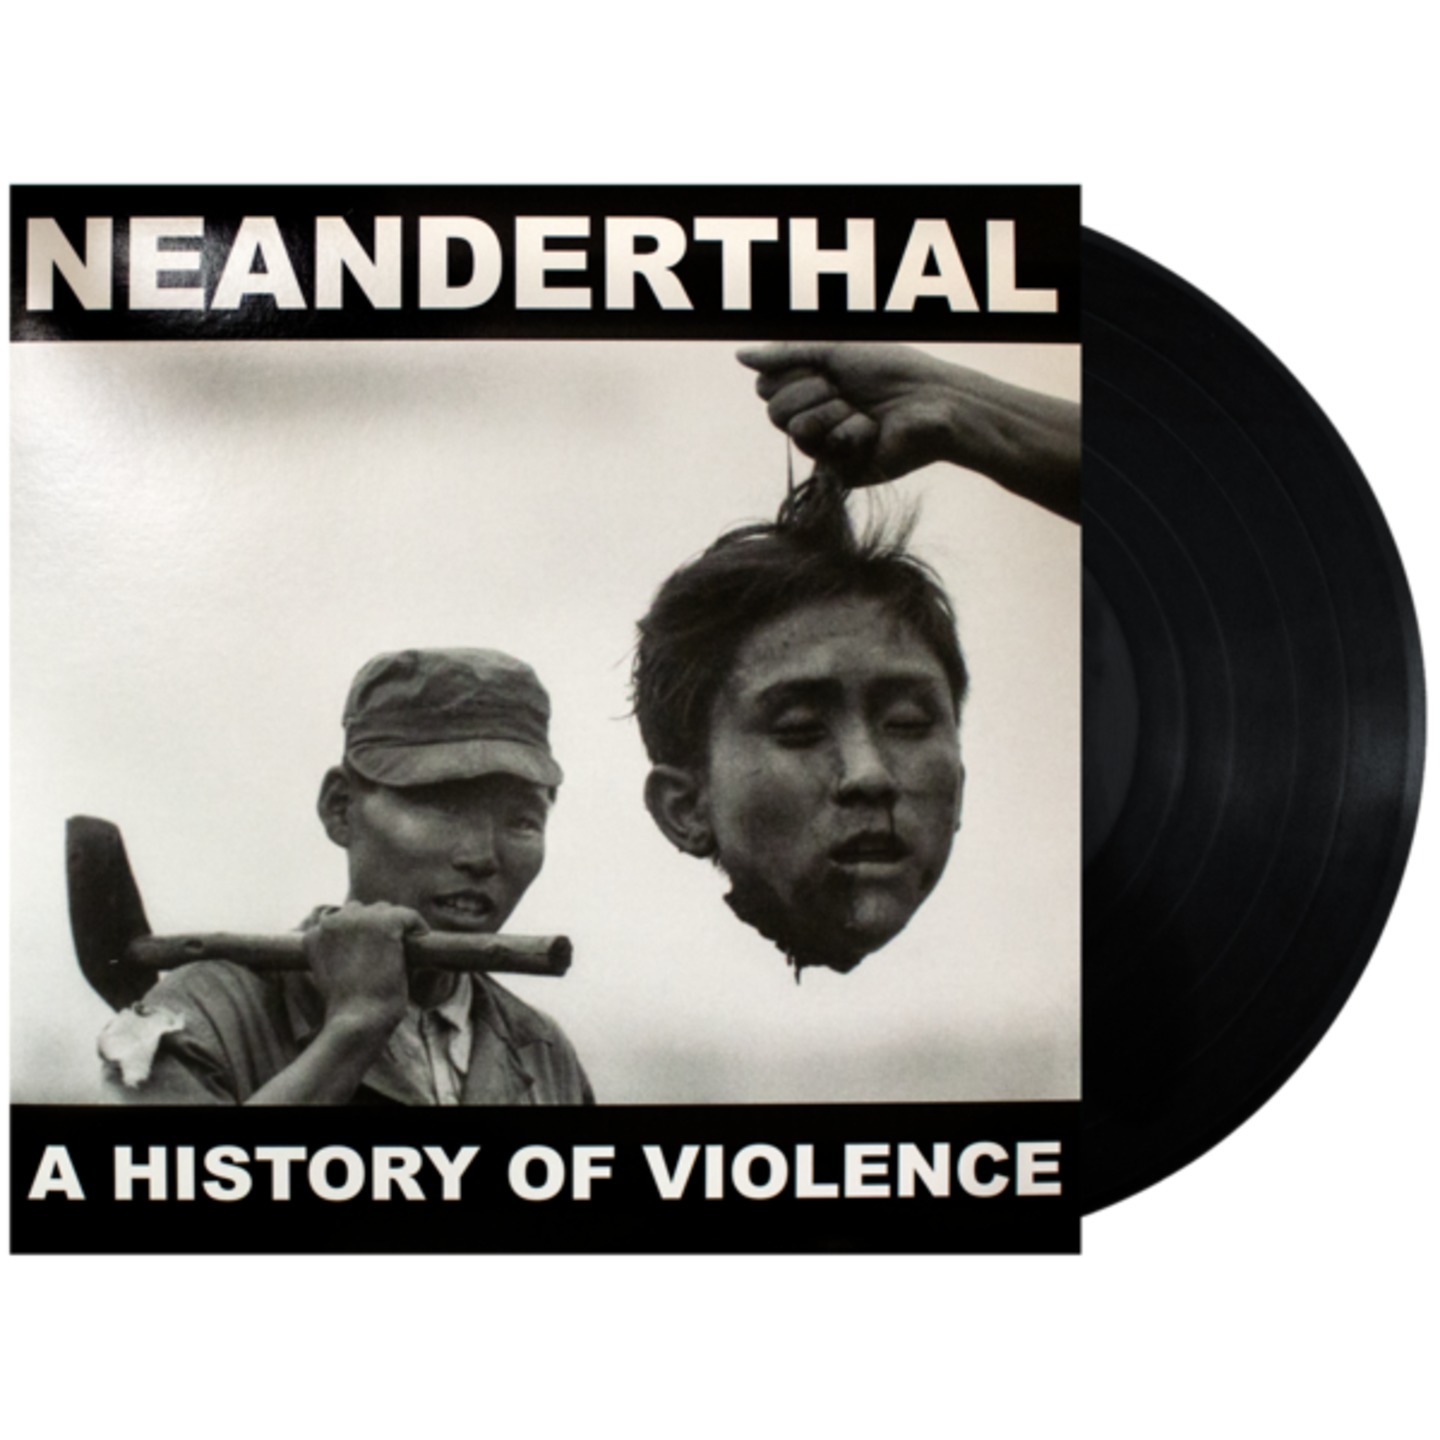 NEANDERTHAL - A History of Violence LP one sided with etching